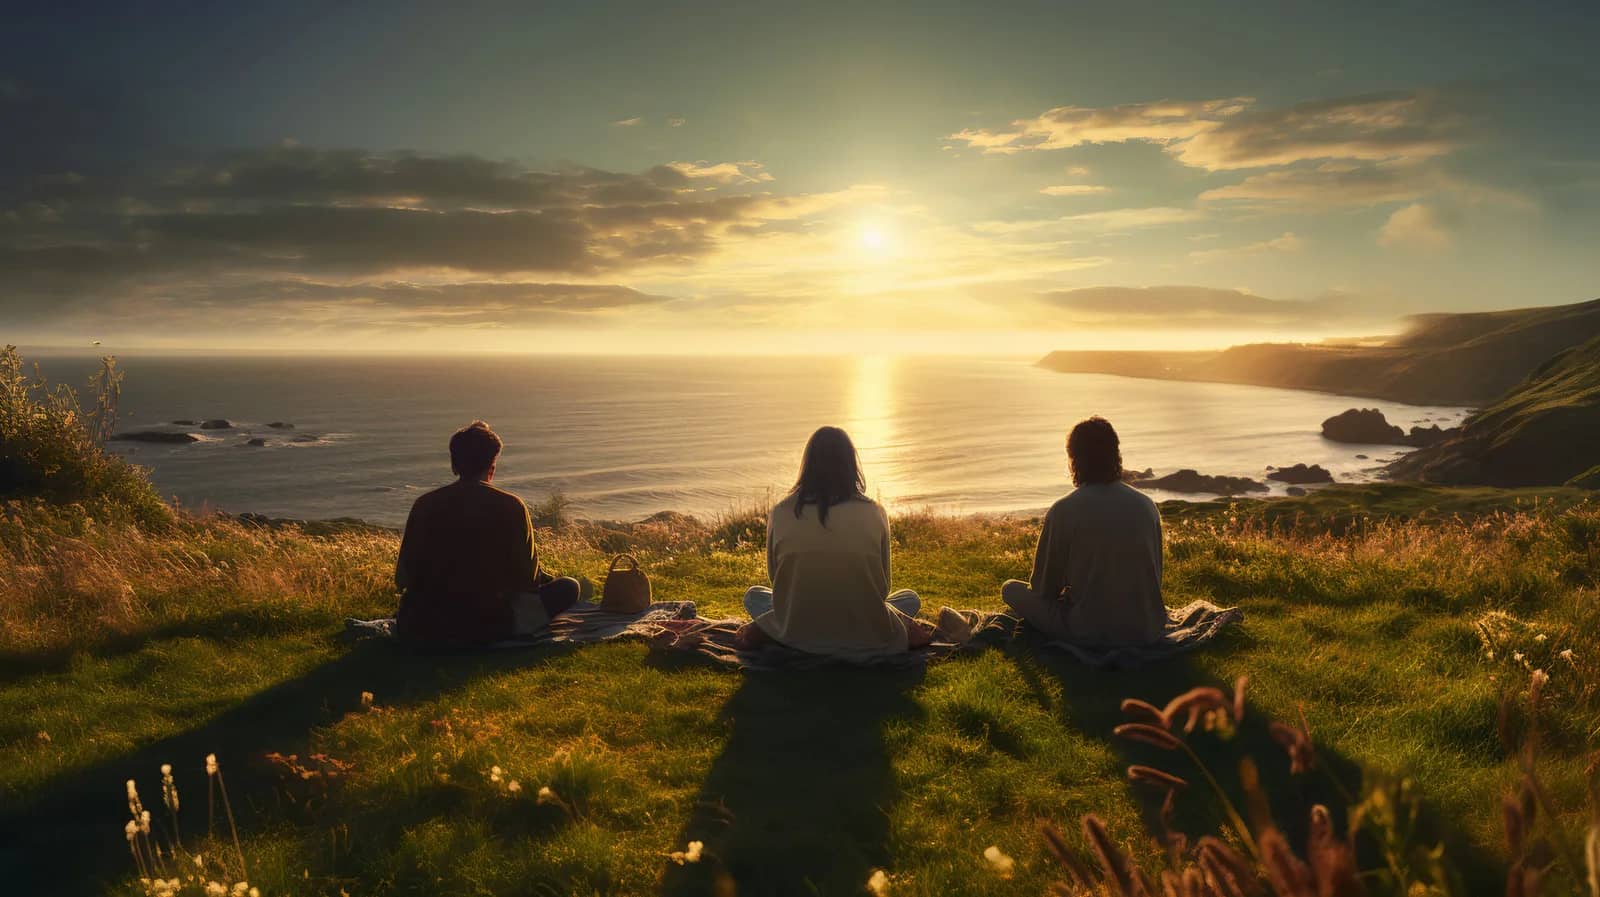 A small group meditating on a grass bank with the sea in the background